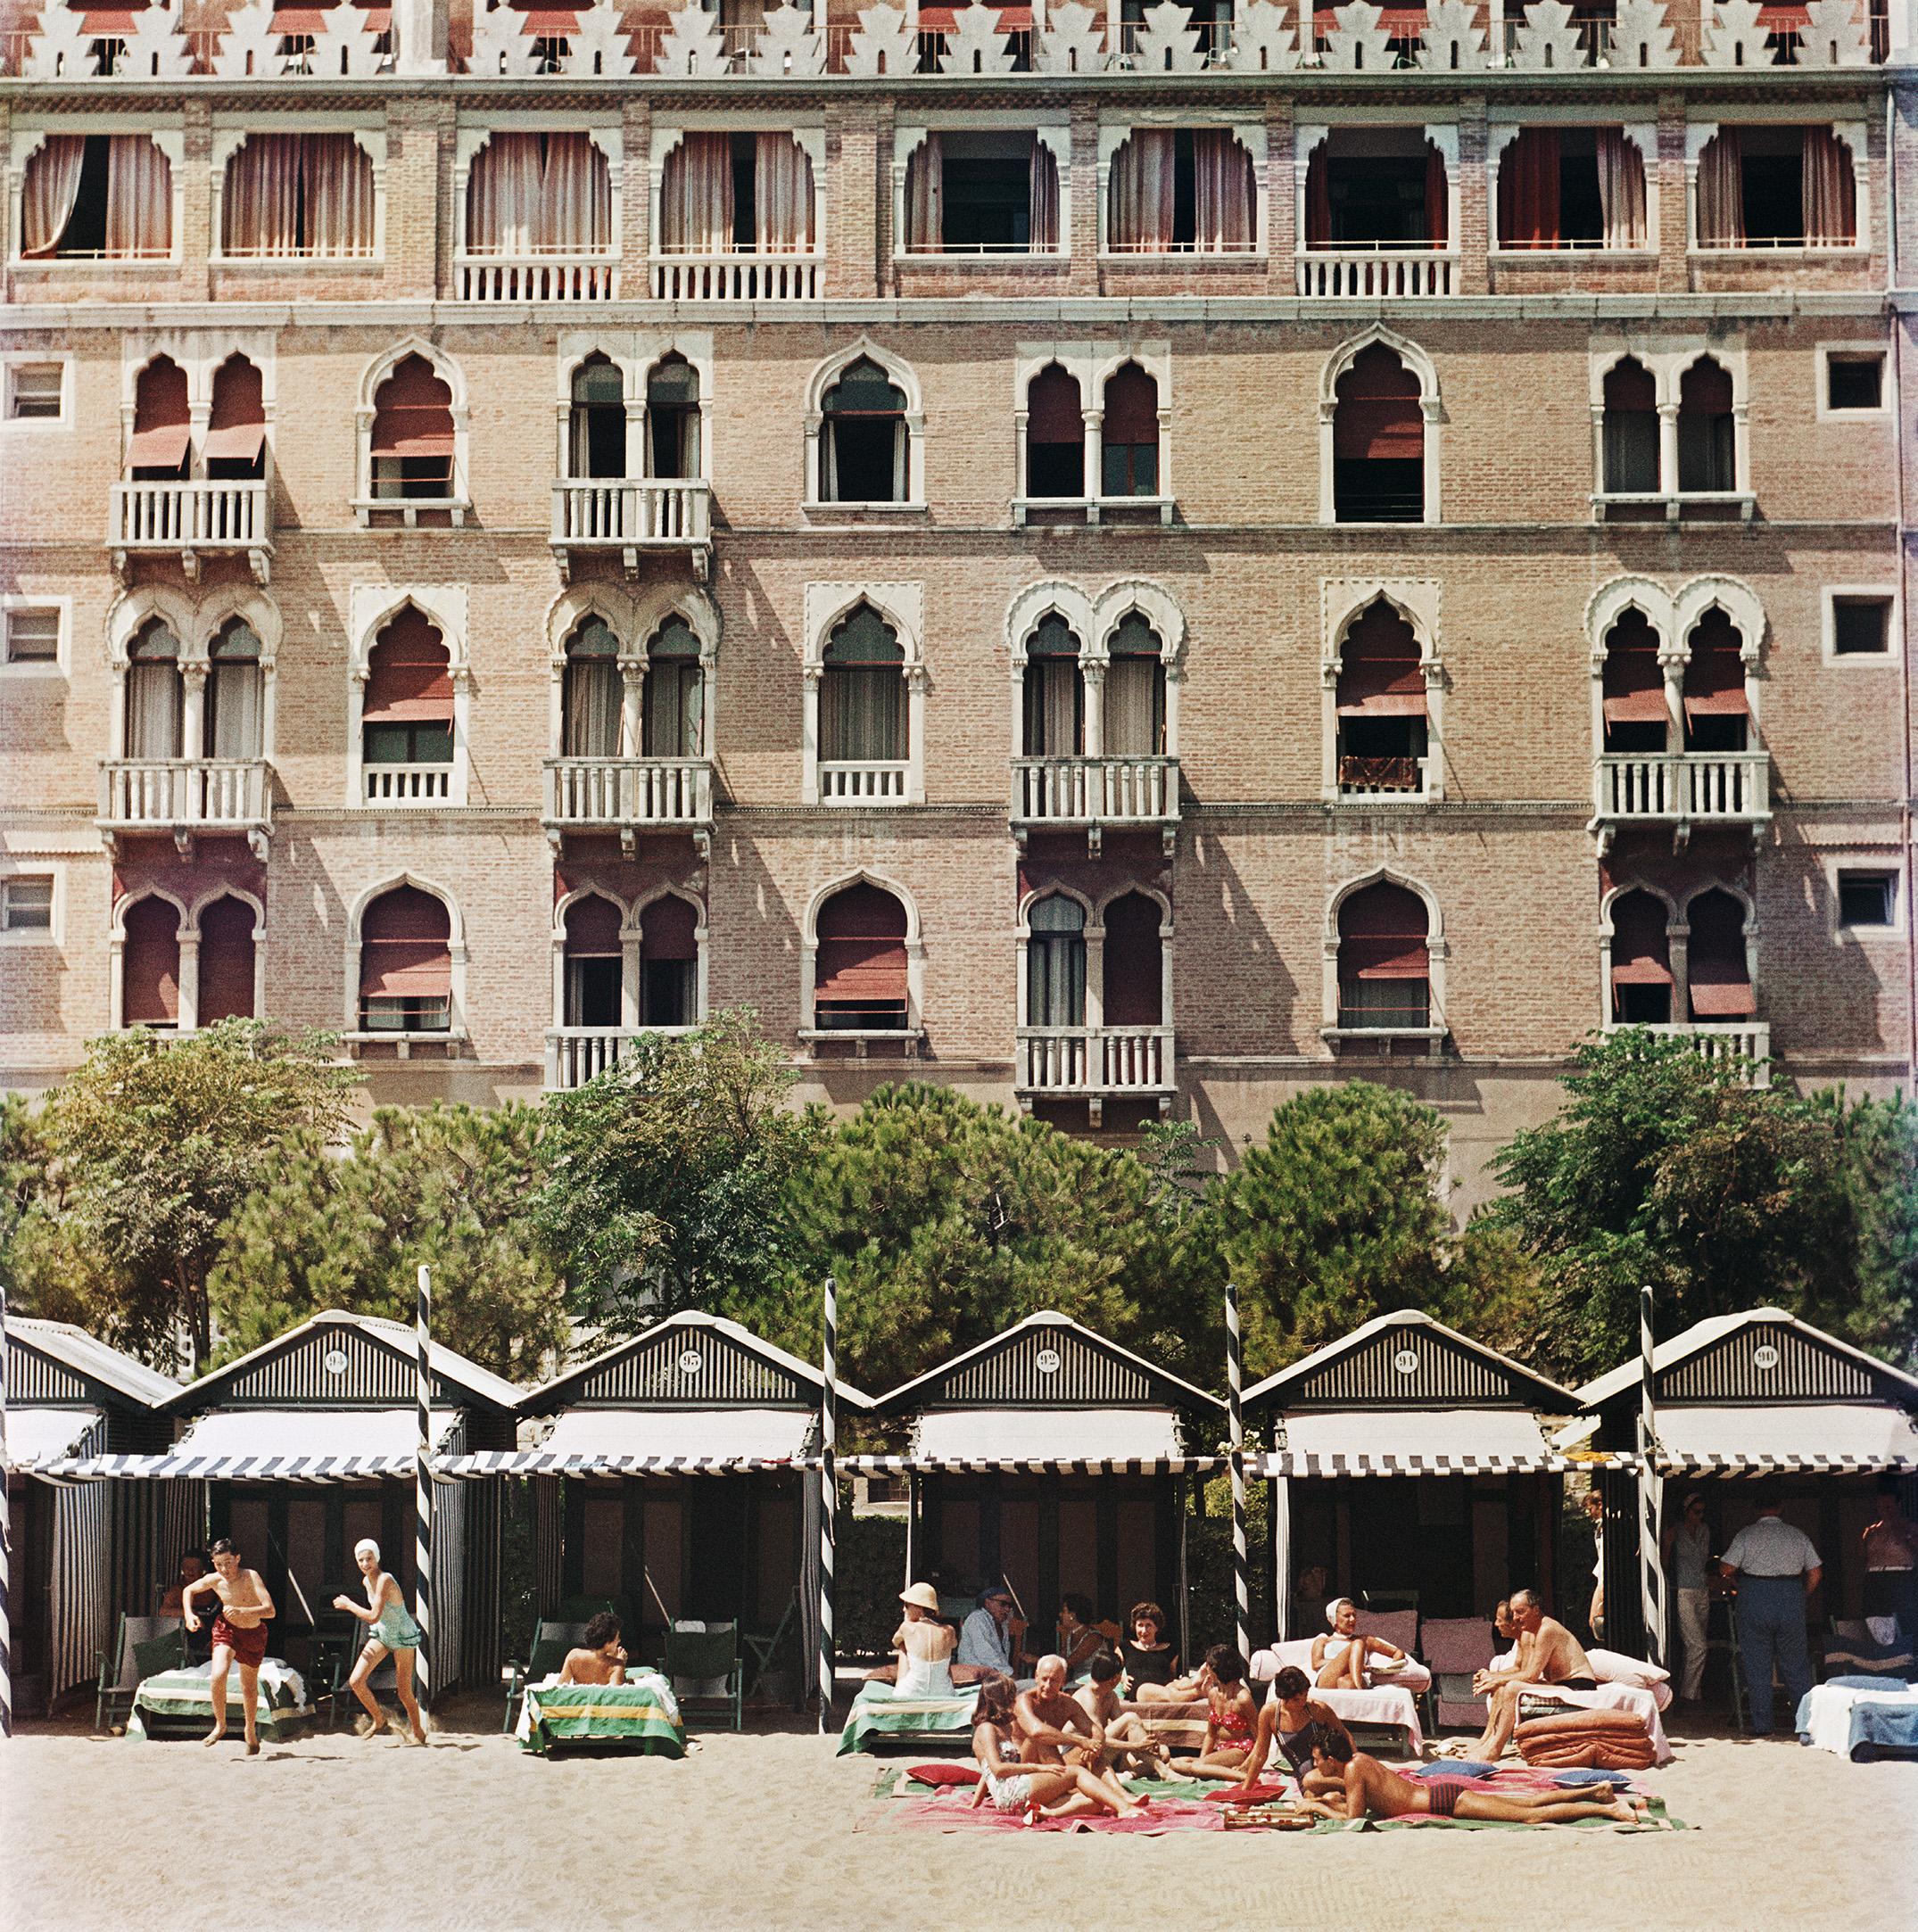 Hotel Excelsior 

1957 

The beach front of the luxurious Excelsior Hotel on the Venice Lido, 1957. 
Photo by Slim Aarons

40x40” / 101 x 101 cm - paper size 
Archival pigment print
unframed 
(framing available see examples - please enquire)